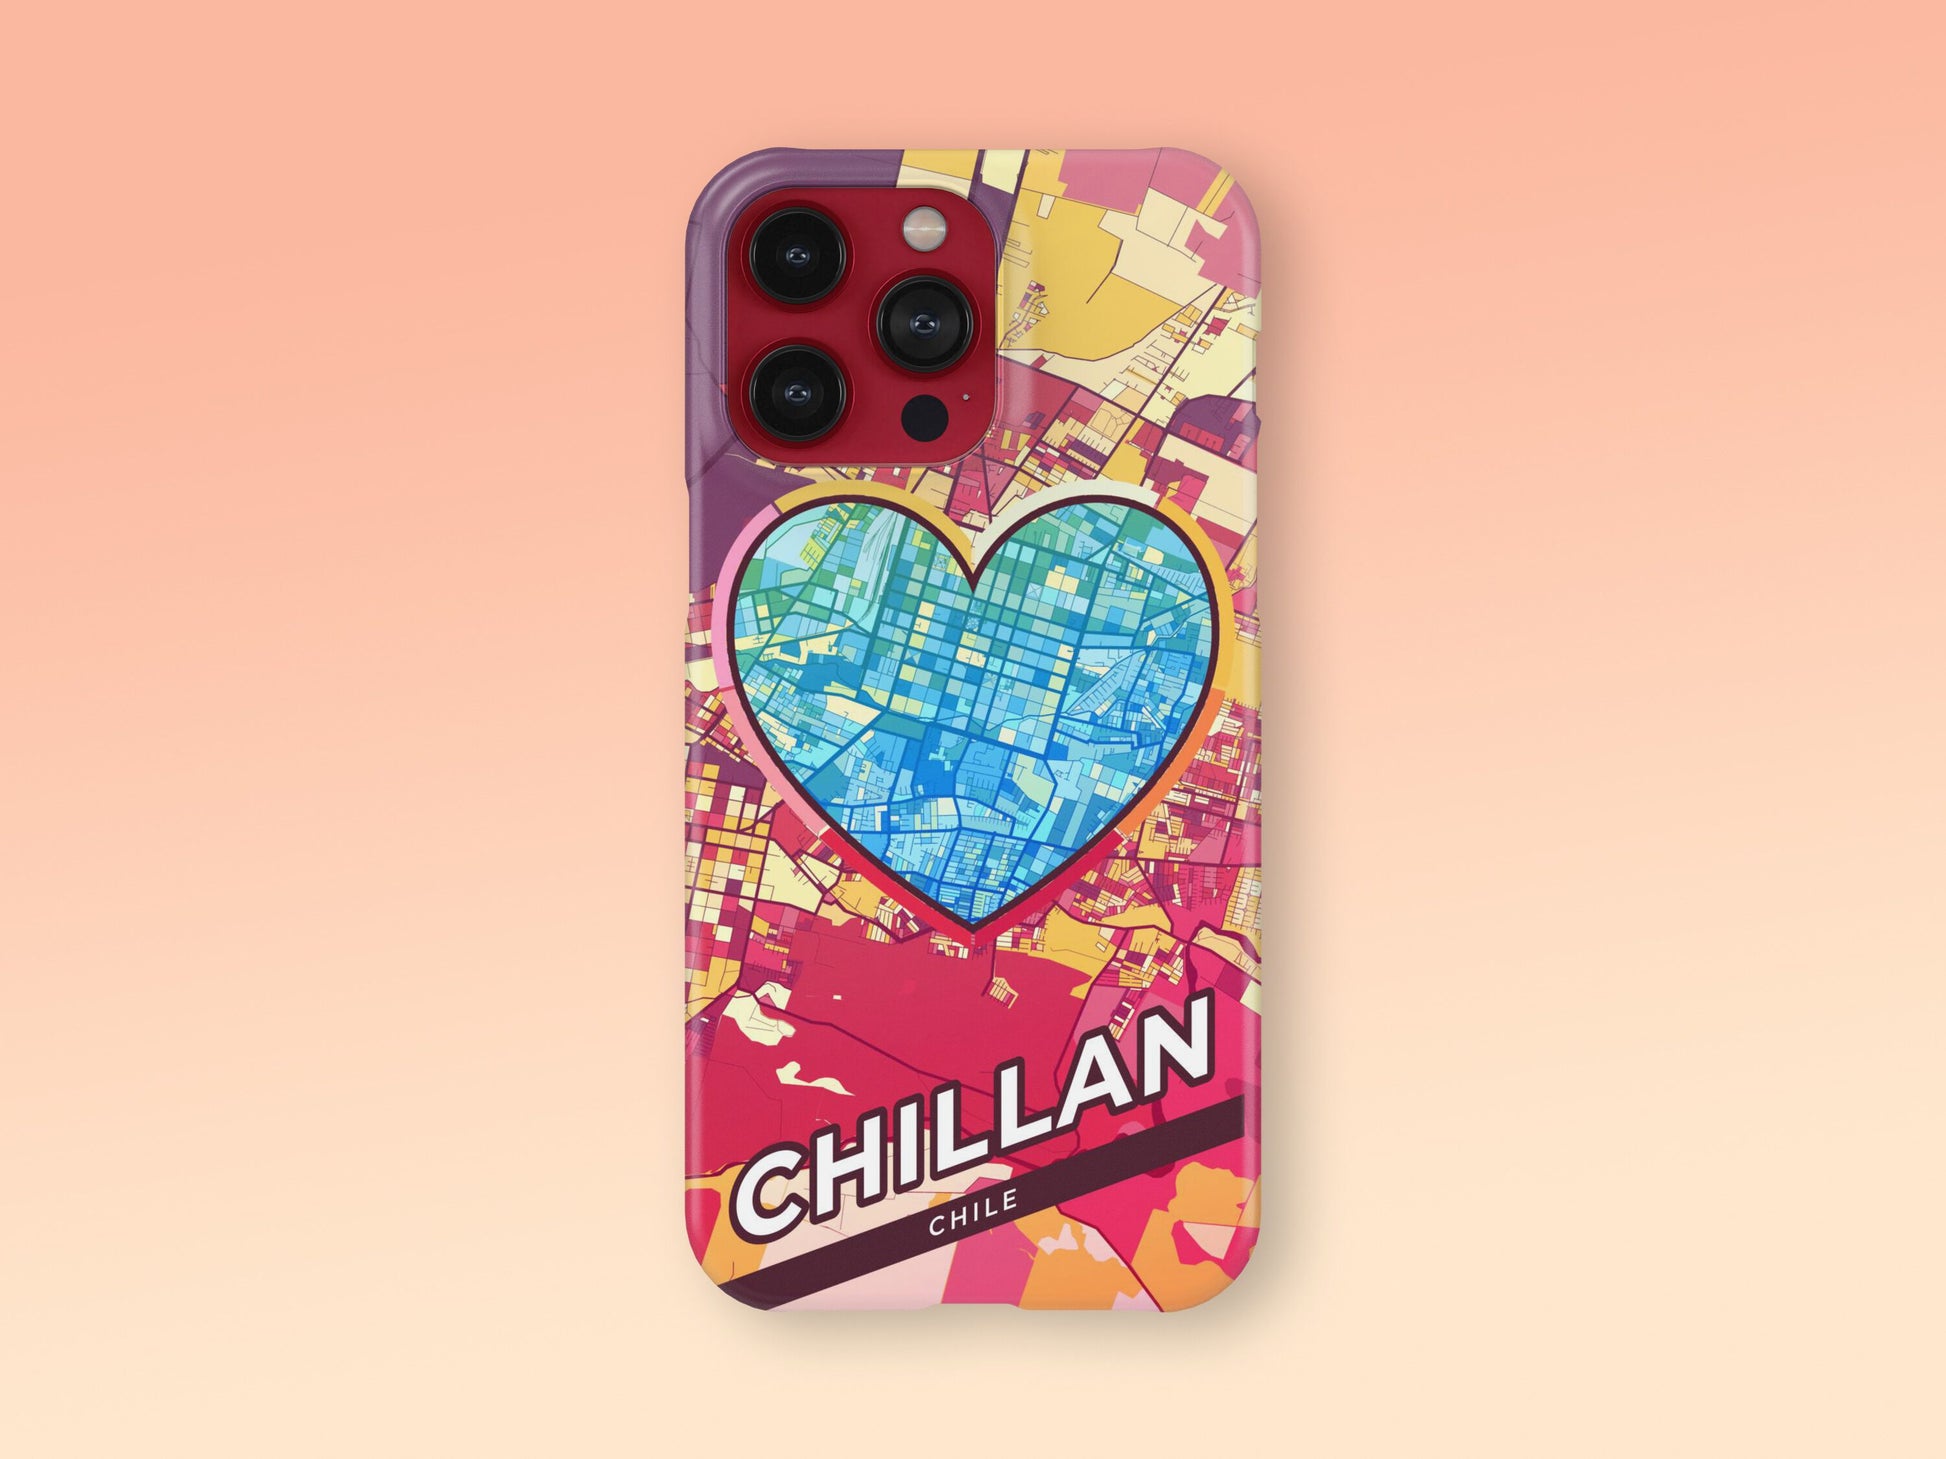 Chillan Chile slim phone case with colorful icon. Birthday, wedding or housewarming gift. Couple match cases. 2